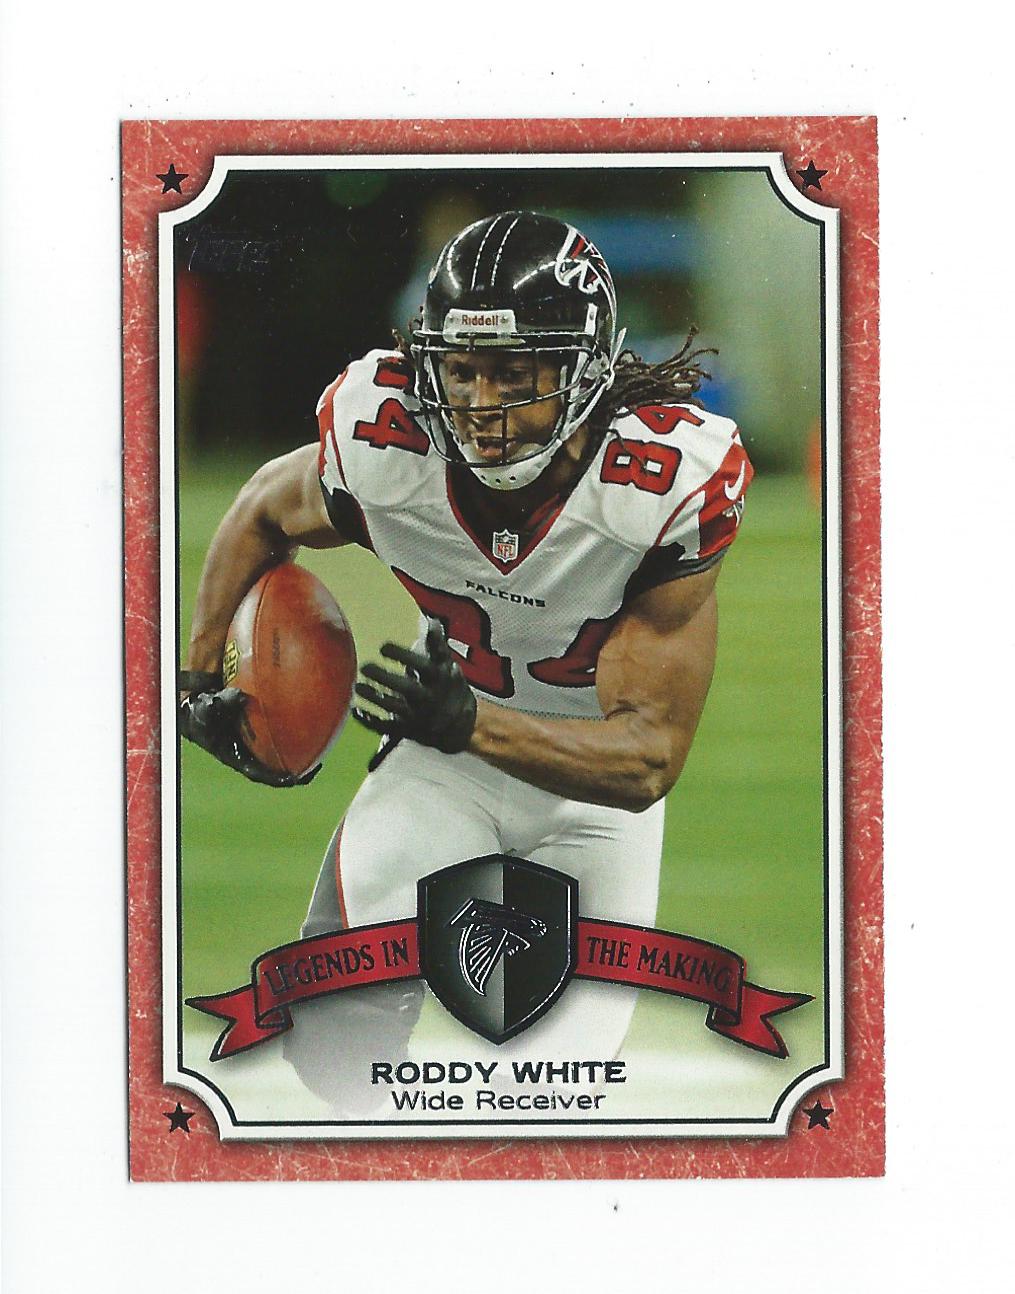 2013 Topps Legends In The Making #LMRWH Roddy White